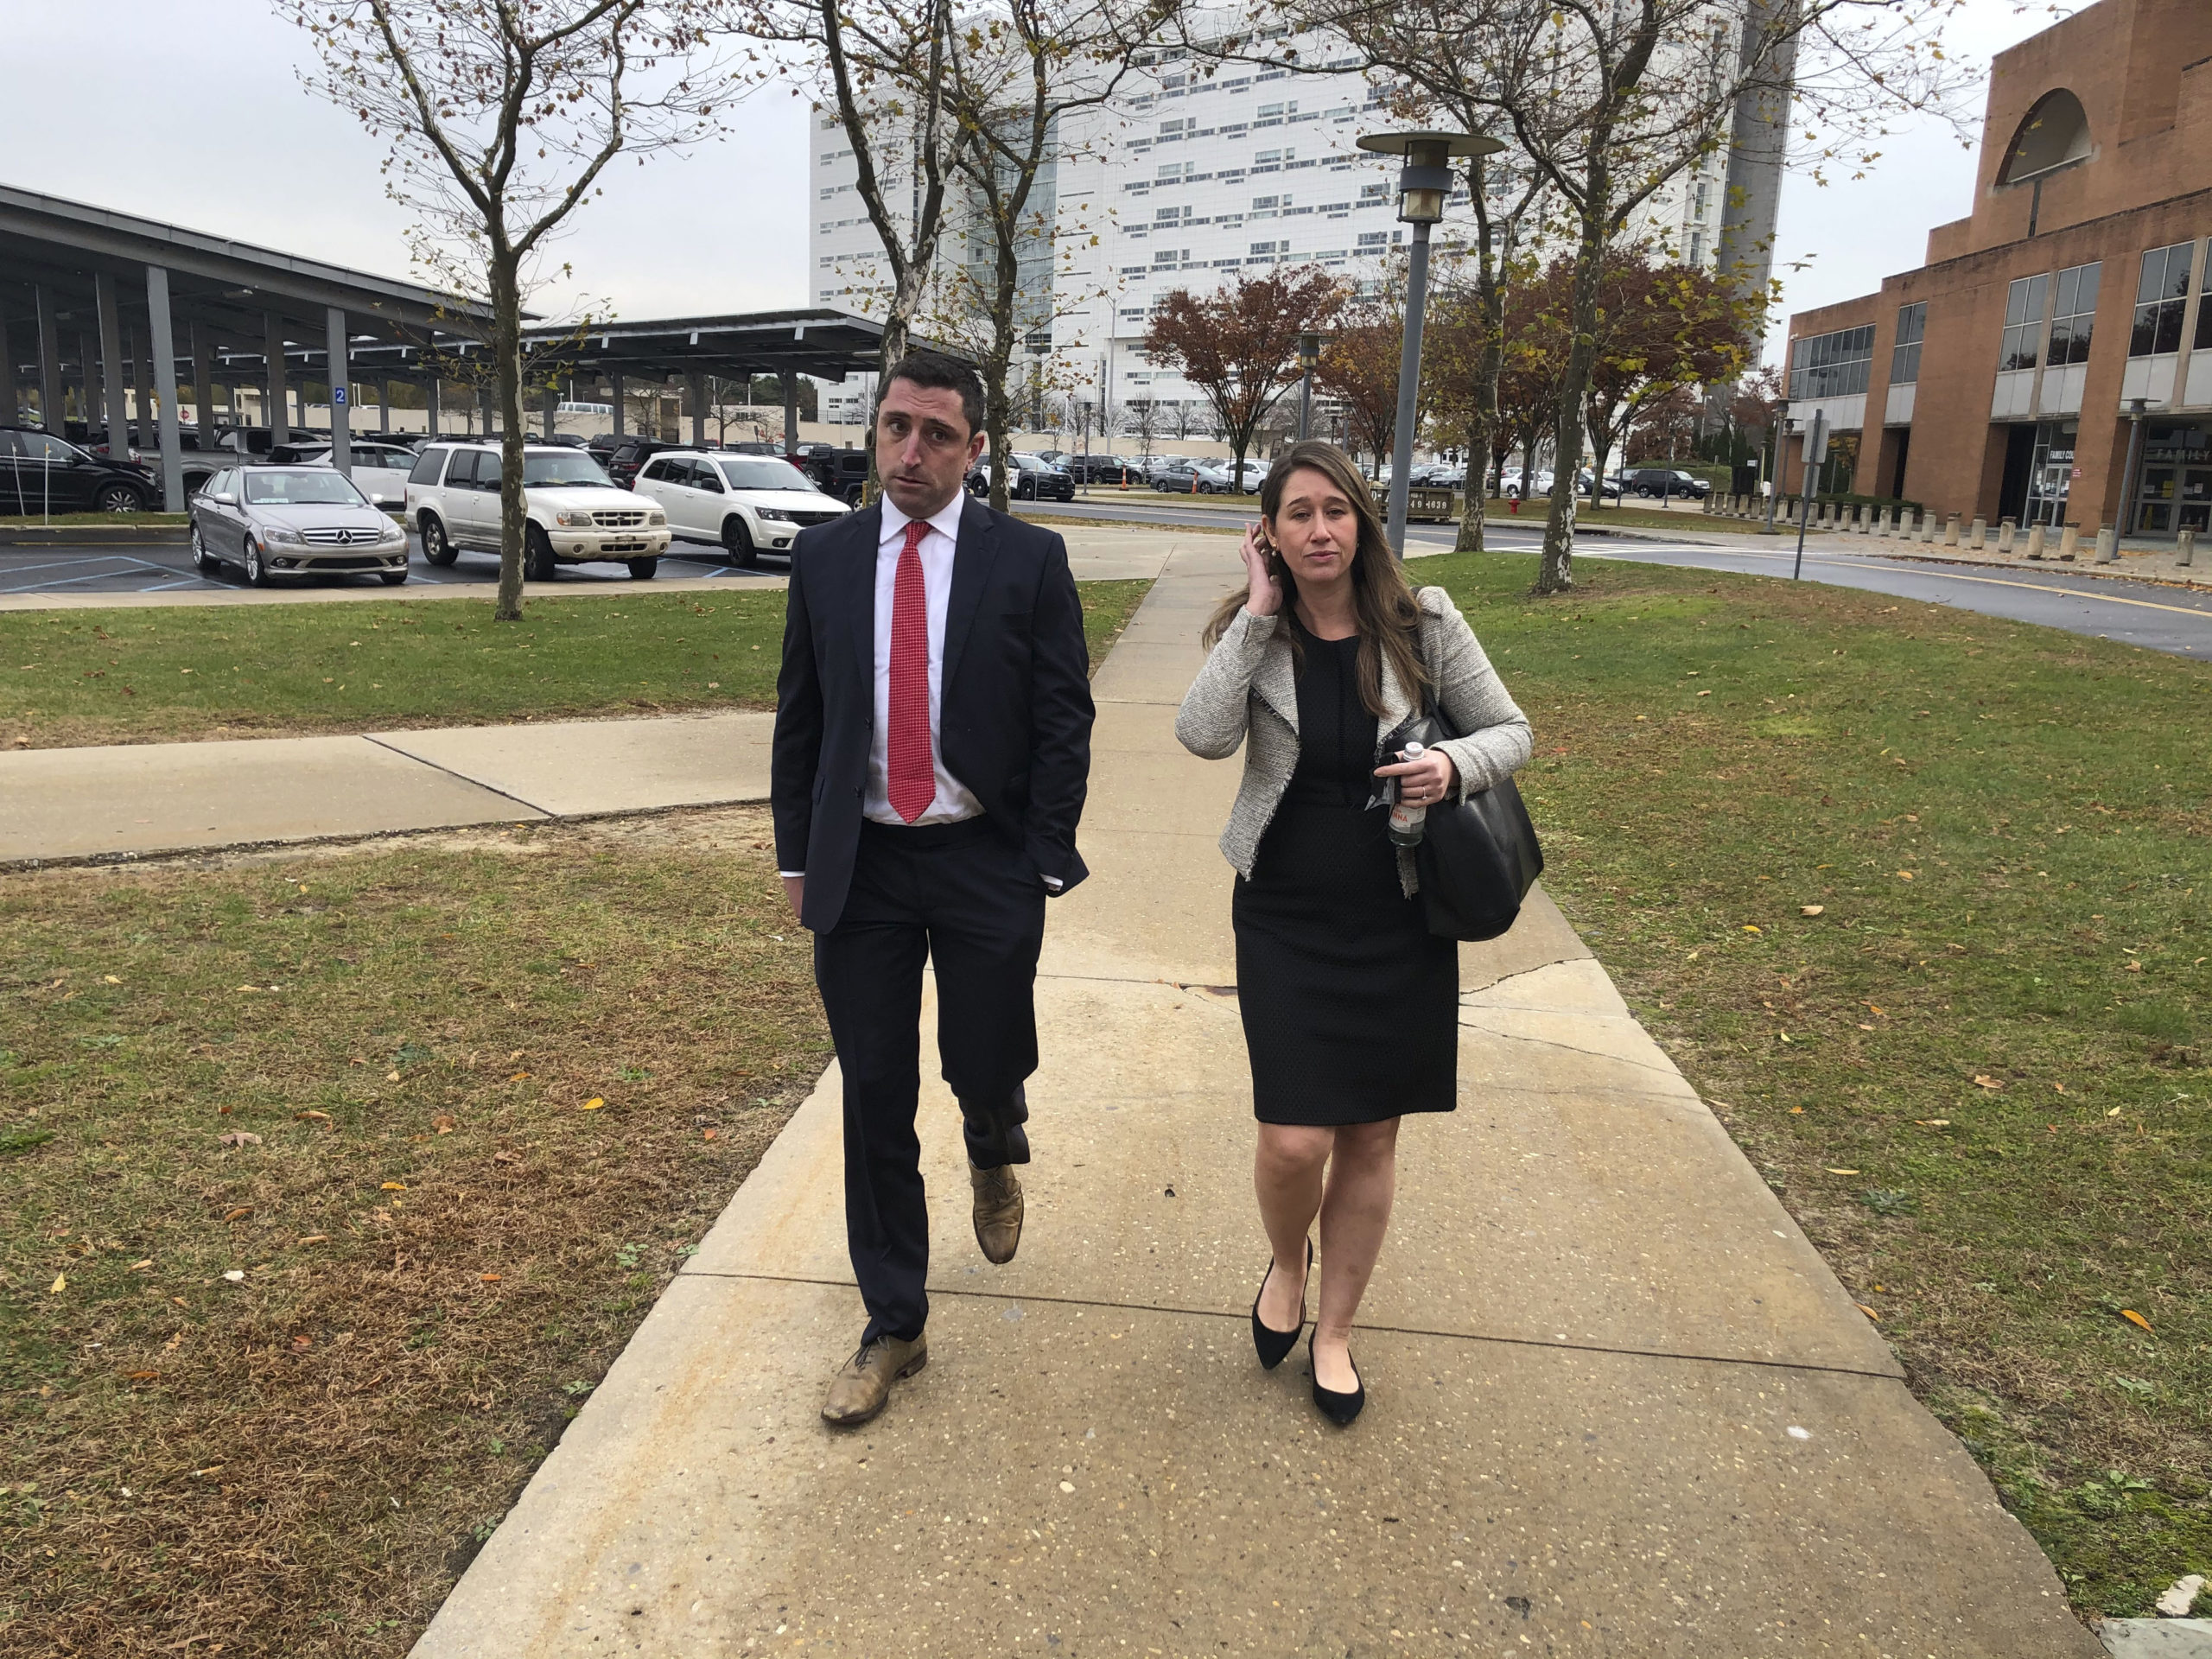 Amos Goodman with his attorney Lindsay Lewis at the Suffolk County Court in Central Islip on Monday.   T.E. MCMORROW